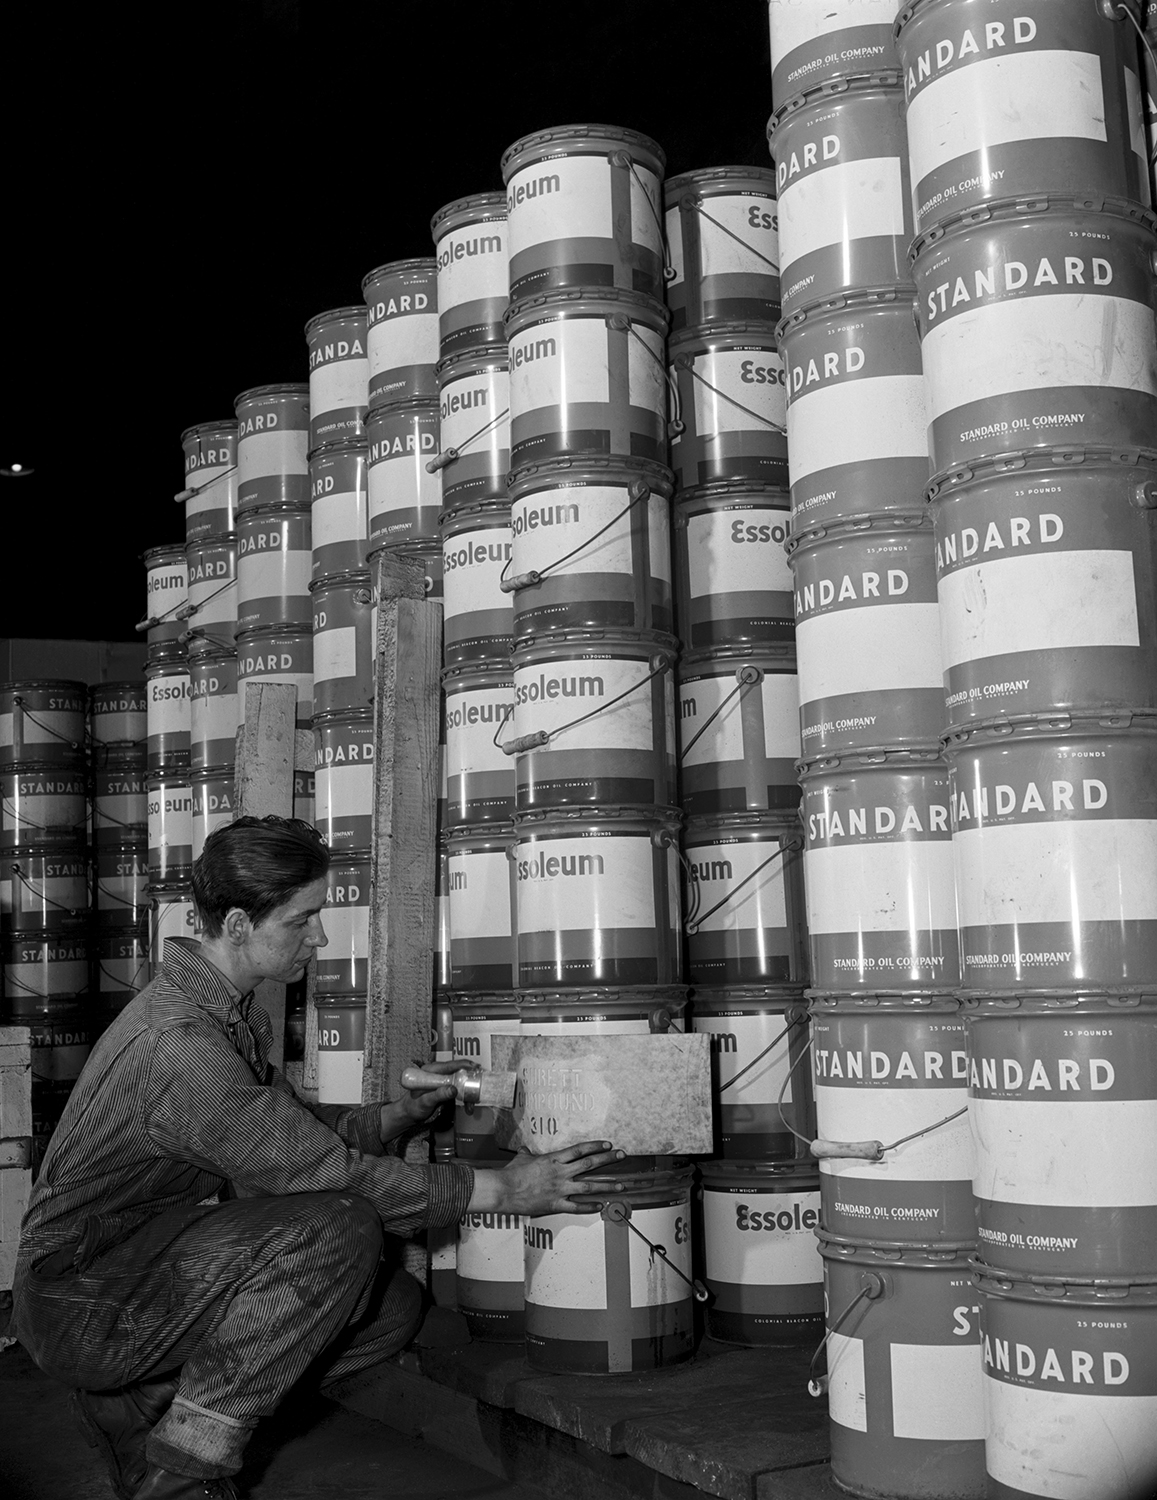 A person attaching a label onto a can